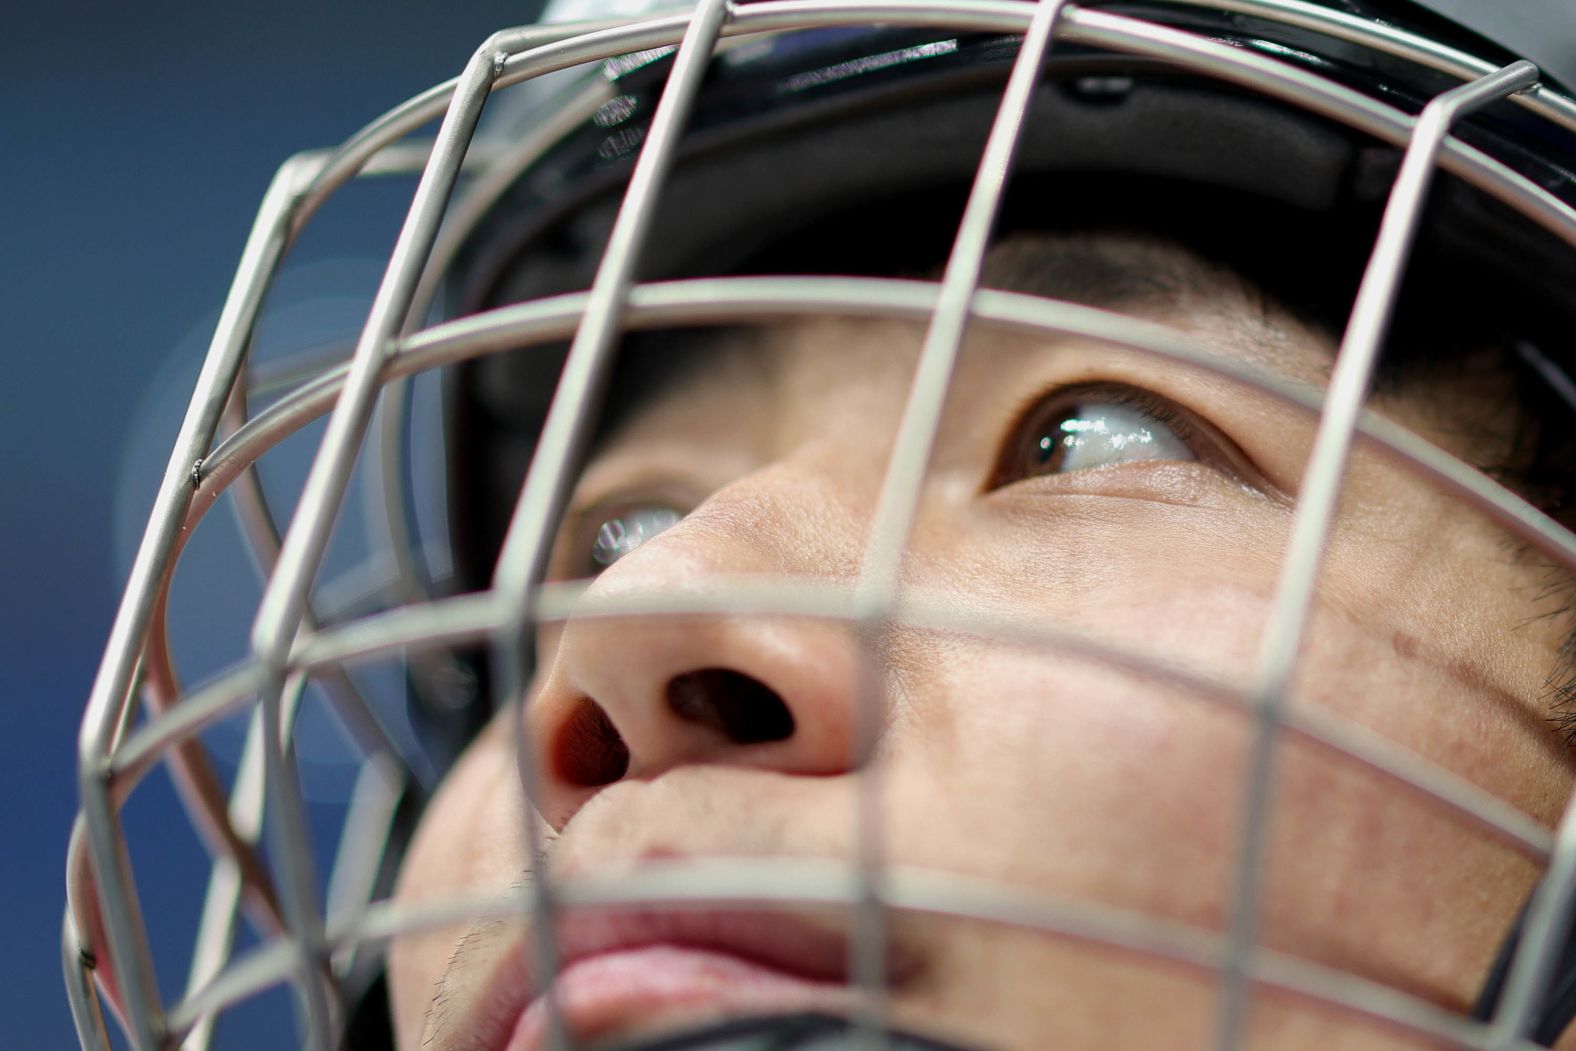 China's Xuesong Bai is seen before a hockey game against the Czech Republic on March 9.